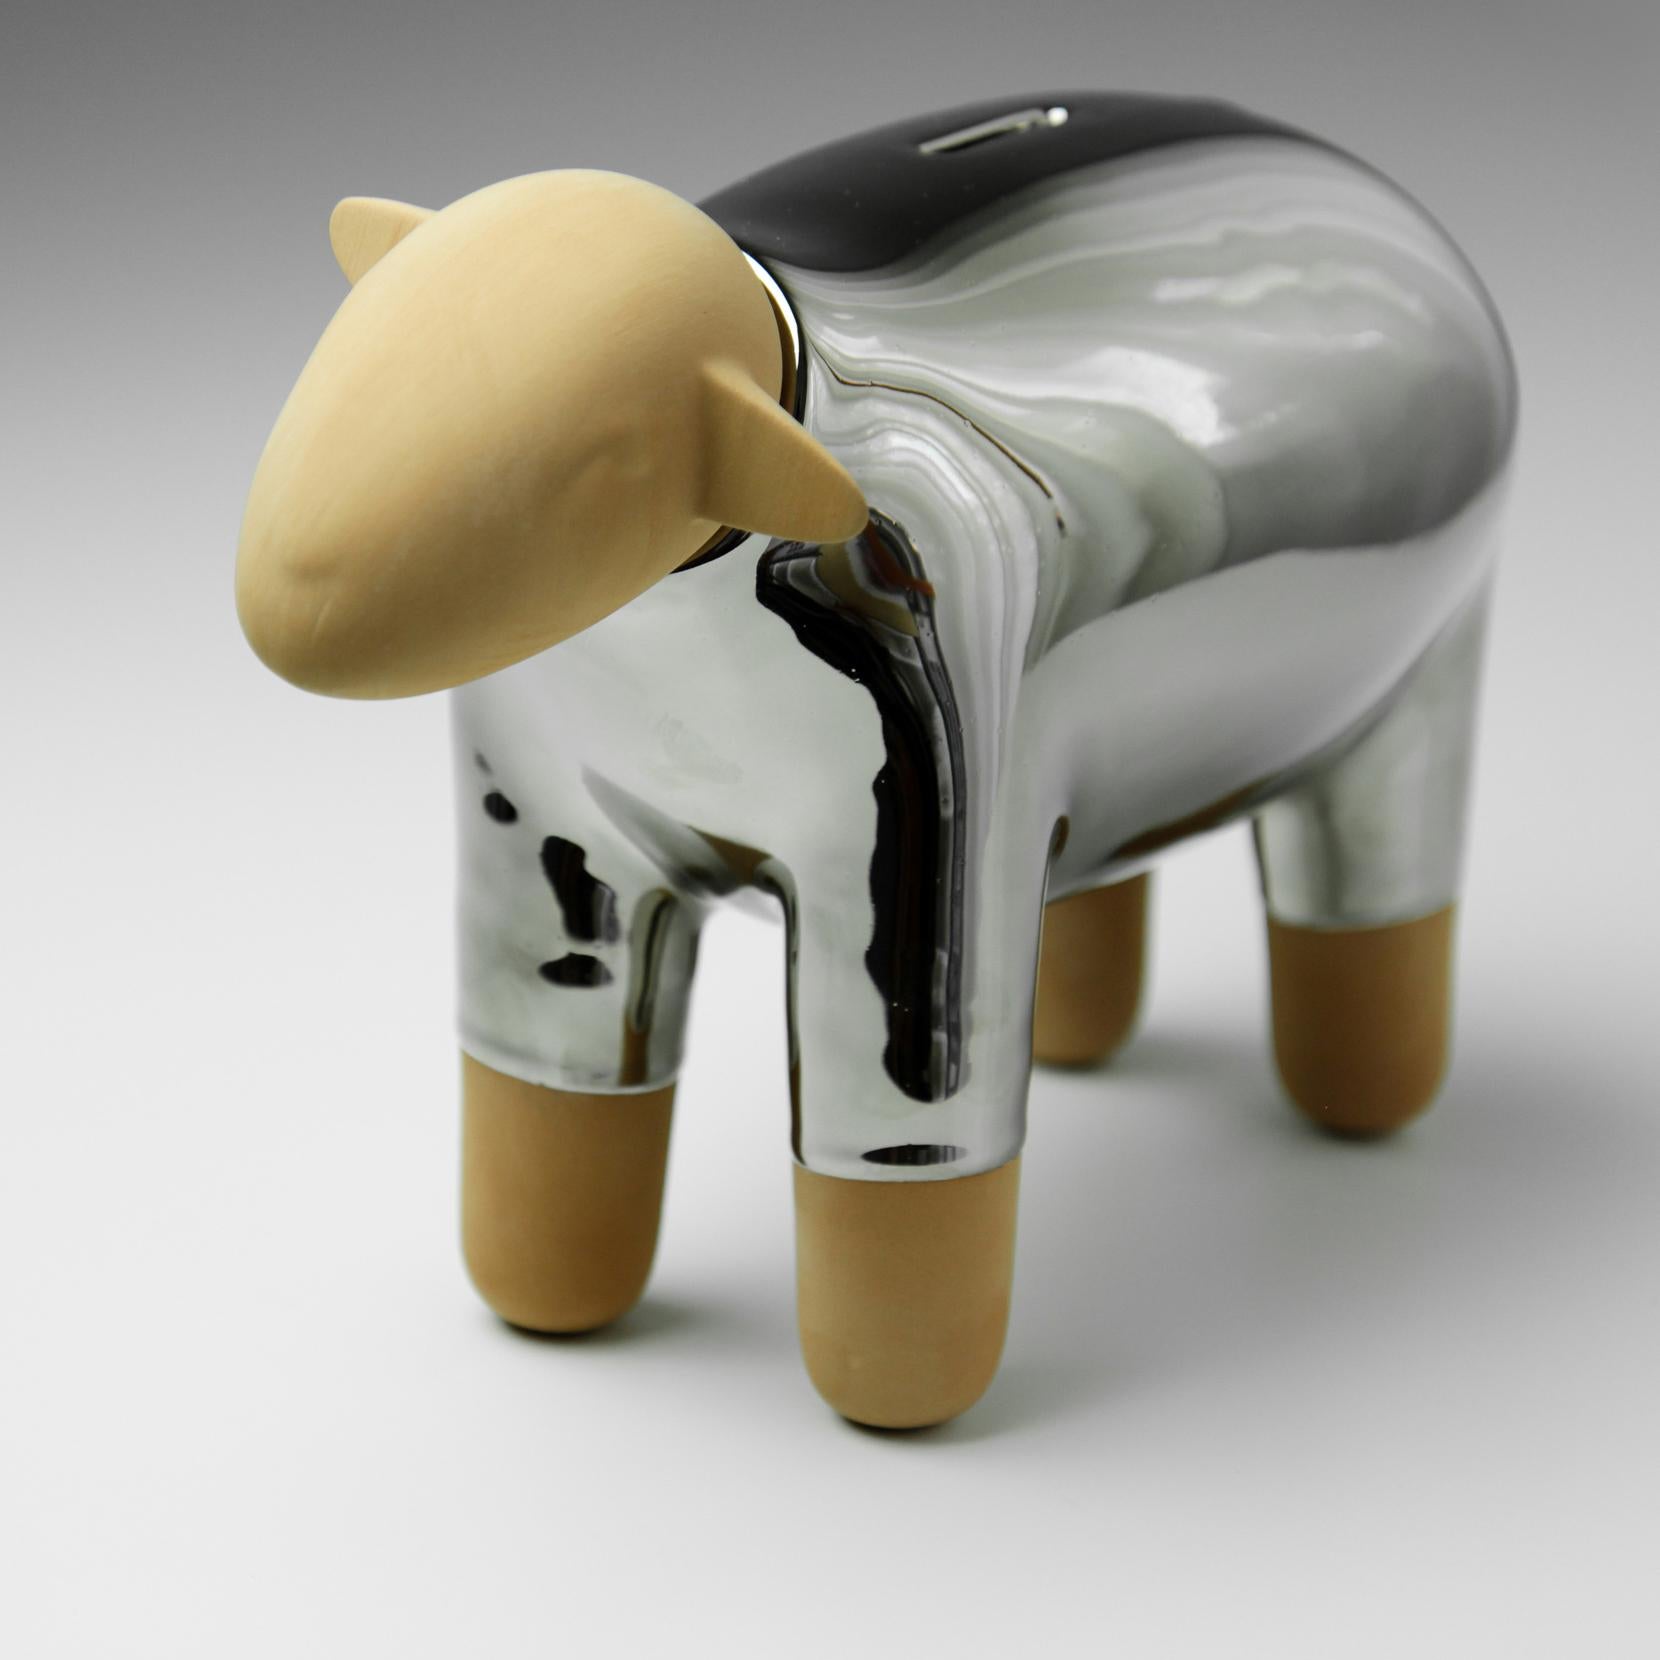 These splendid ceramic creations are born from the artistic laboratory of Mosche Bianche. 

The piggy bank, a means that has always been used to remind us of the importance of saving, takes on a playful and artistic role with the shape of a sheep,